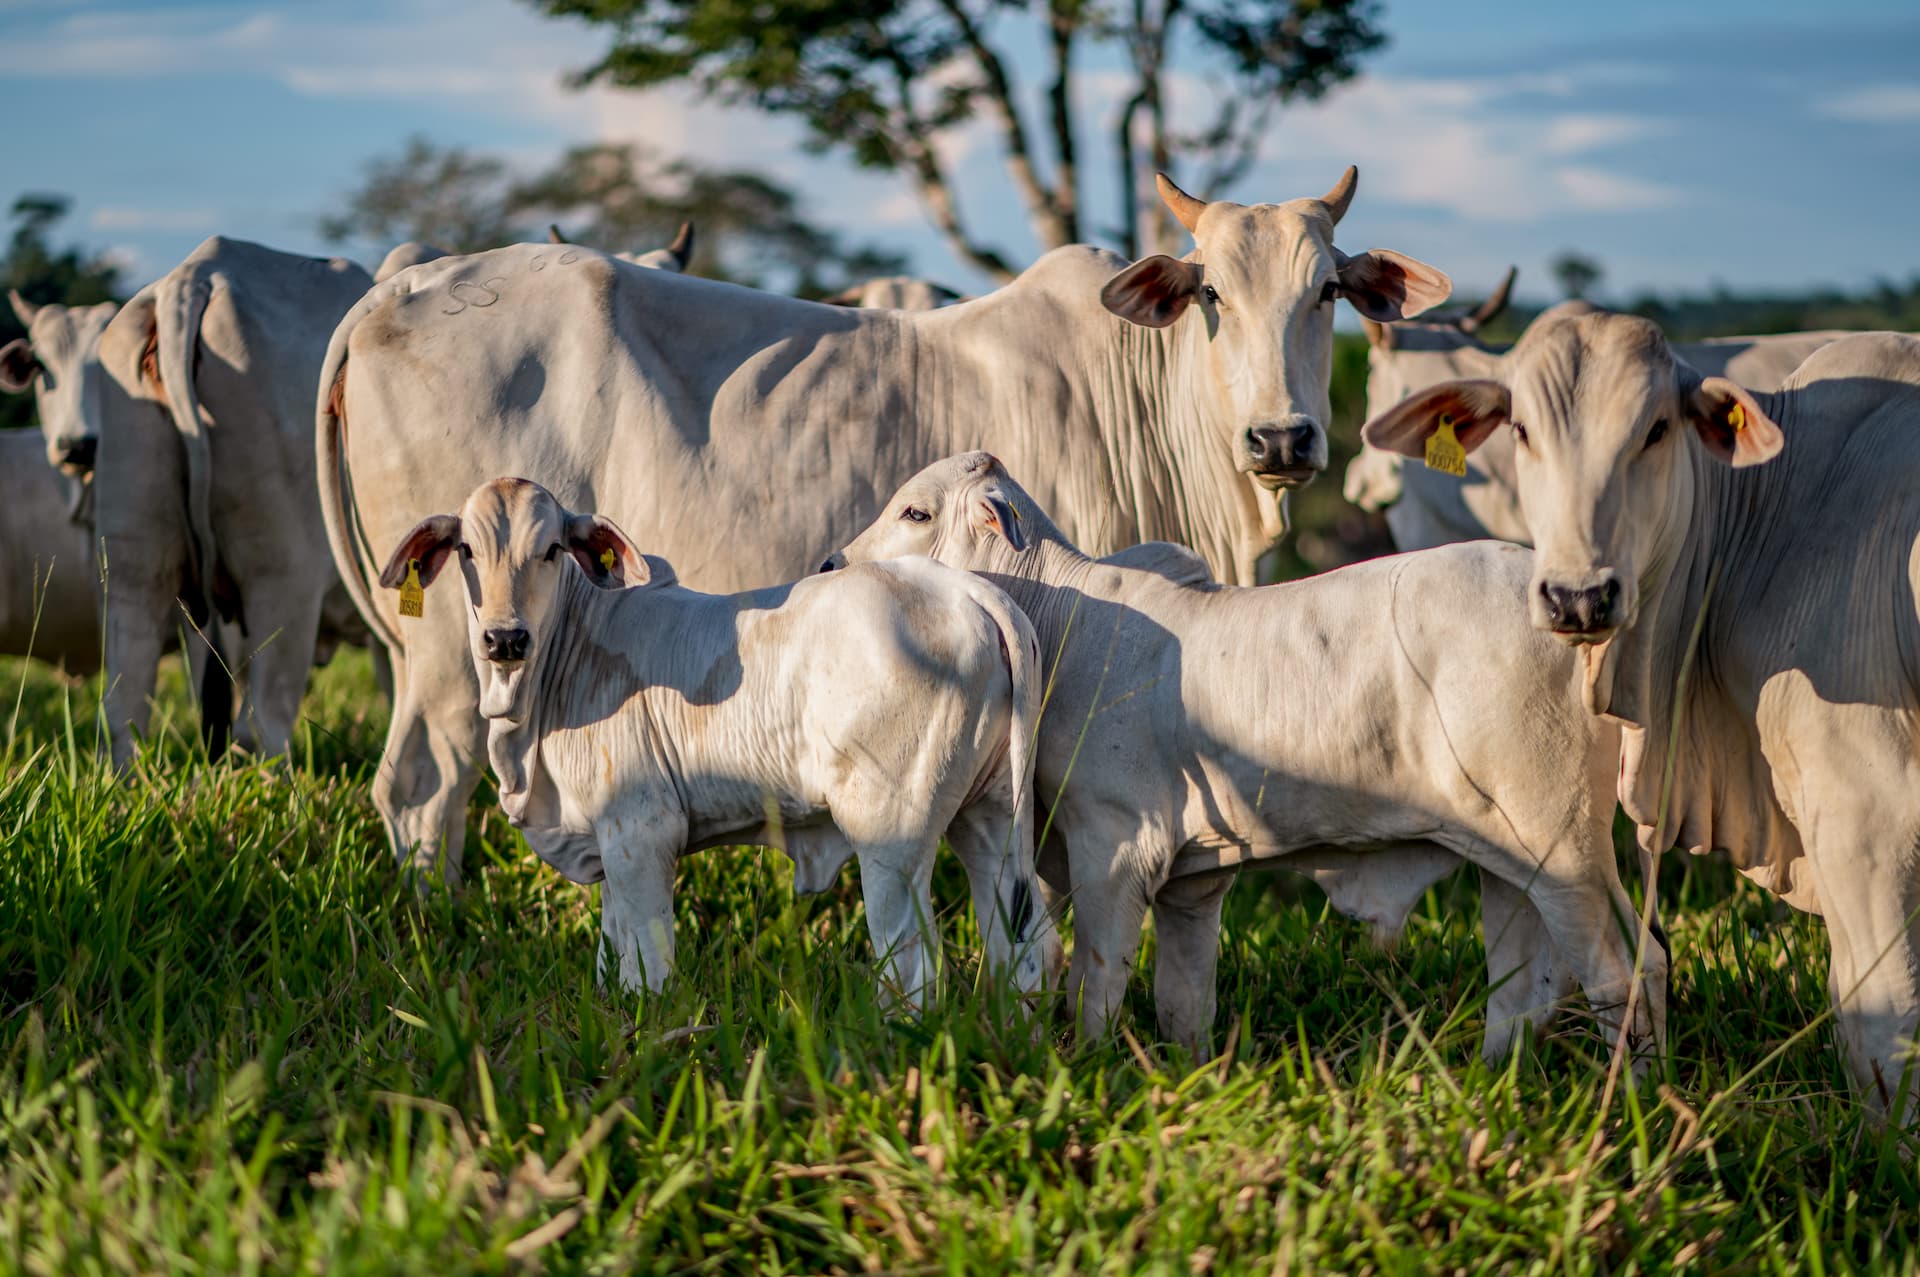 Carrefour Brazil and IDH achieves the “impossible”: 100% traceable beef